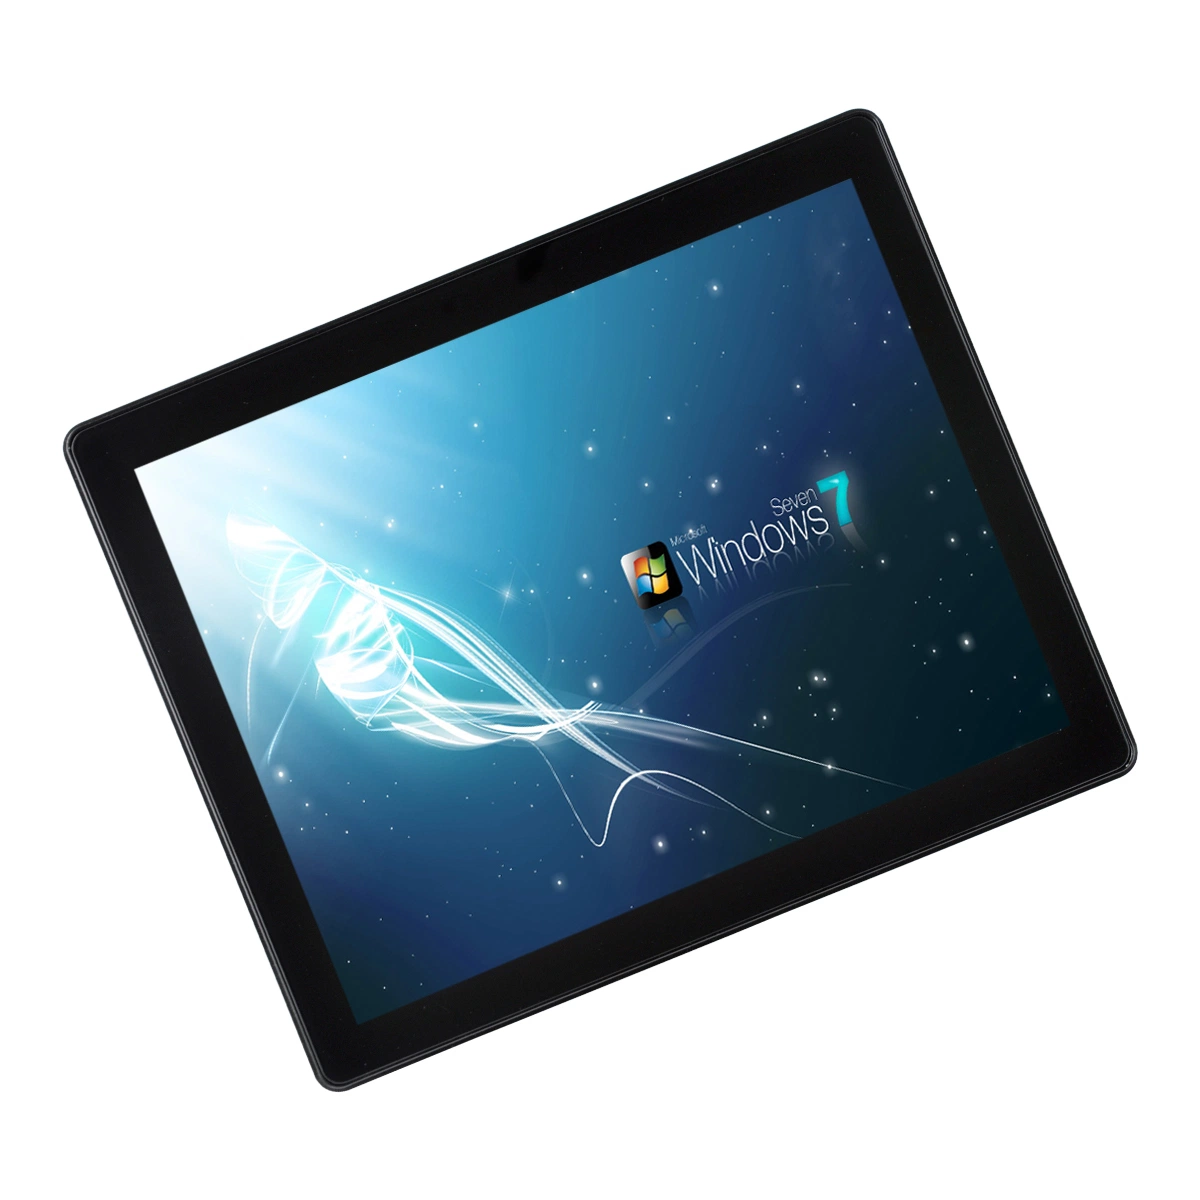 Waterproof 17'' All in One Pcap Touchscreen Computer Windows OS